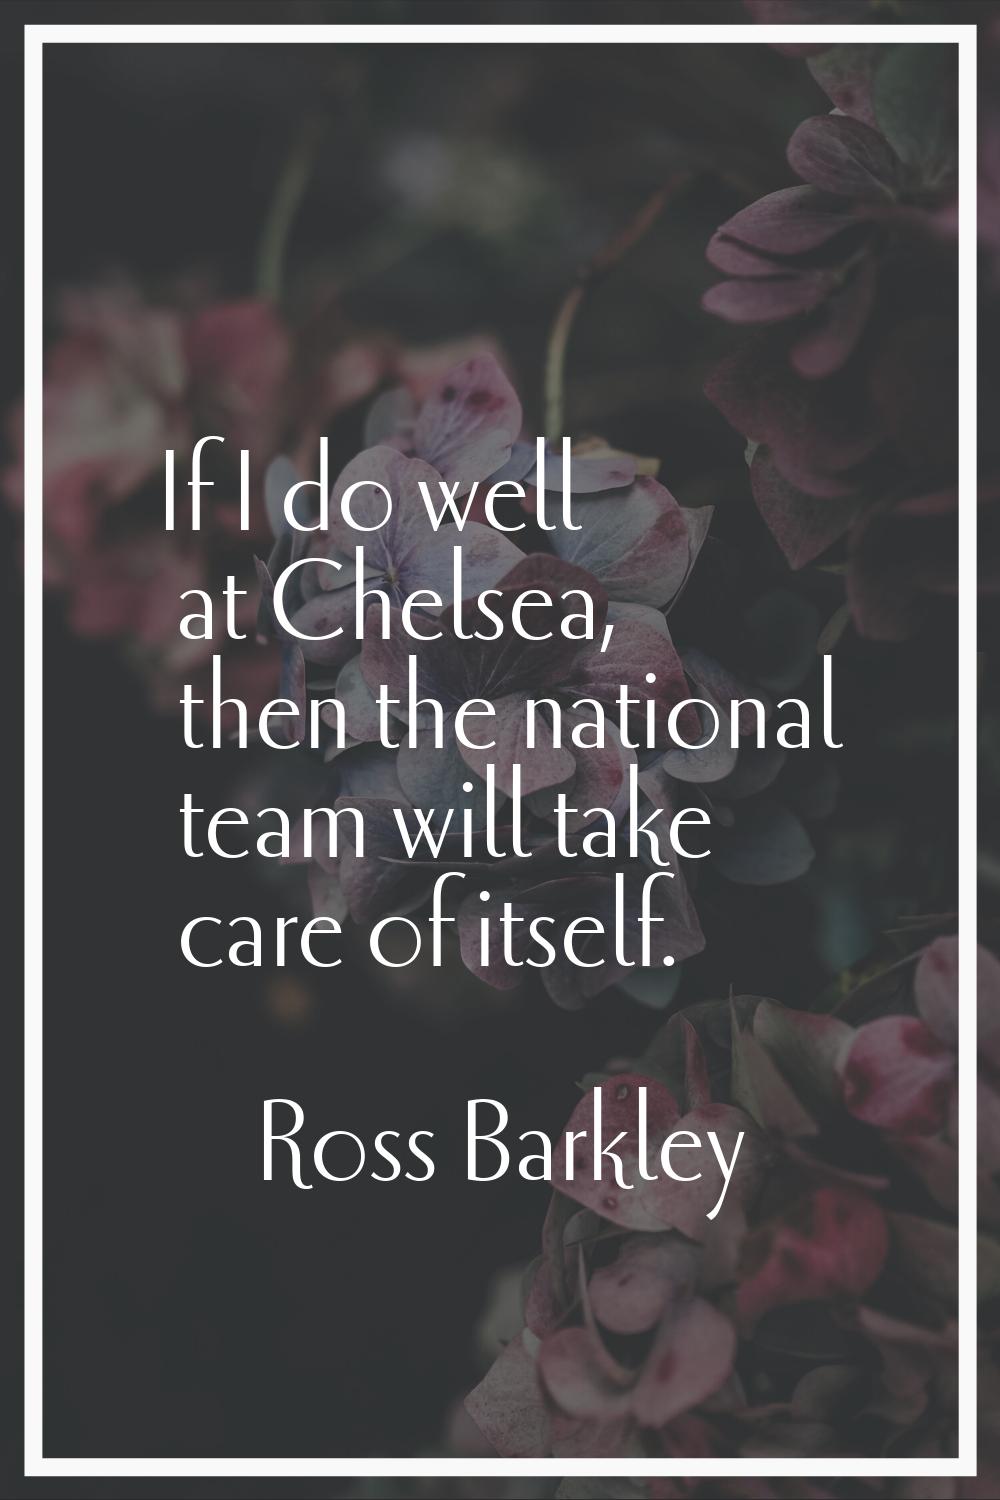 If I do well at Chelsea, then the national team will take care of itself.